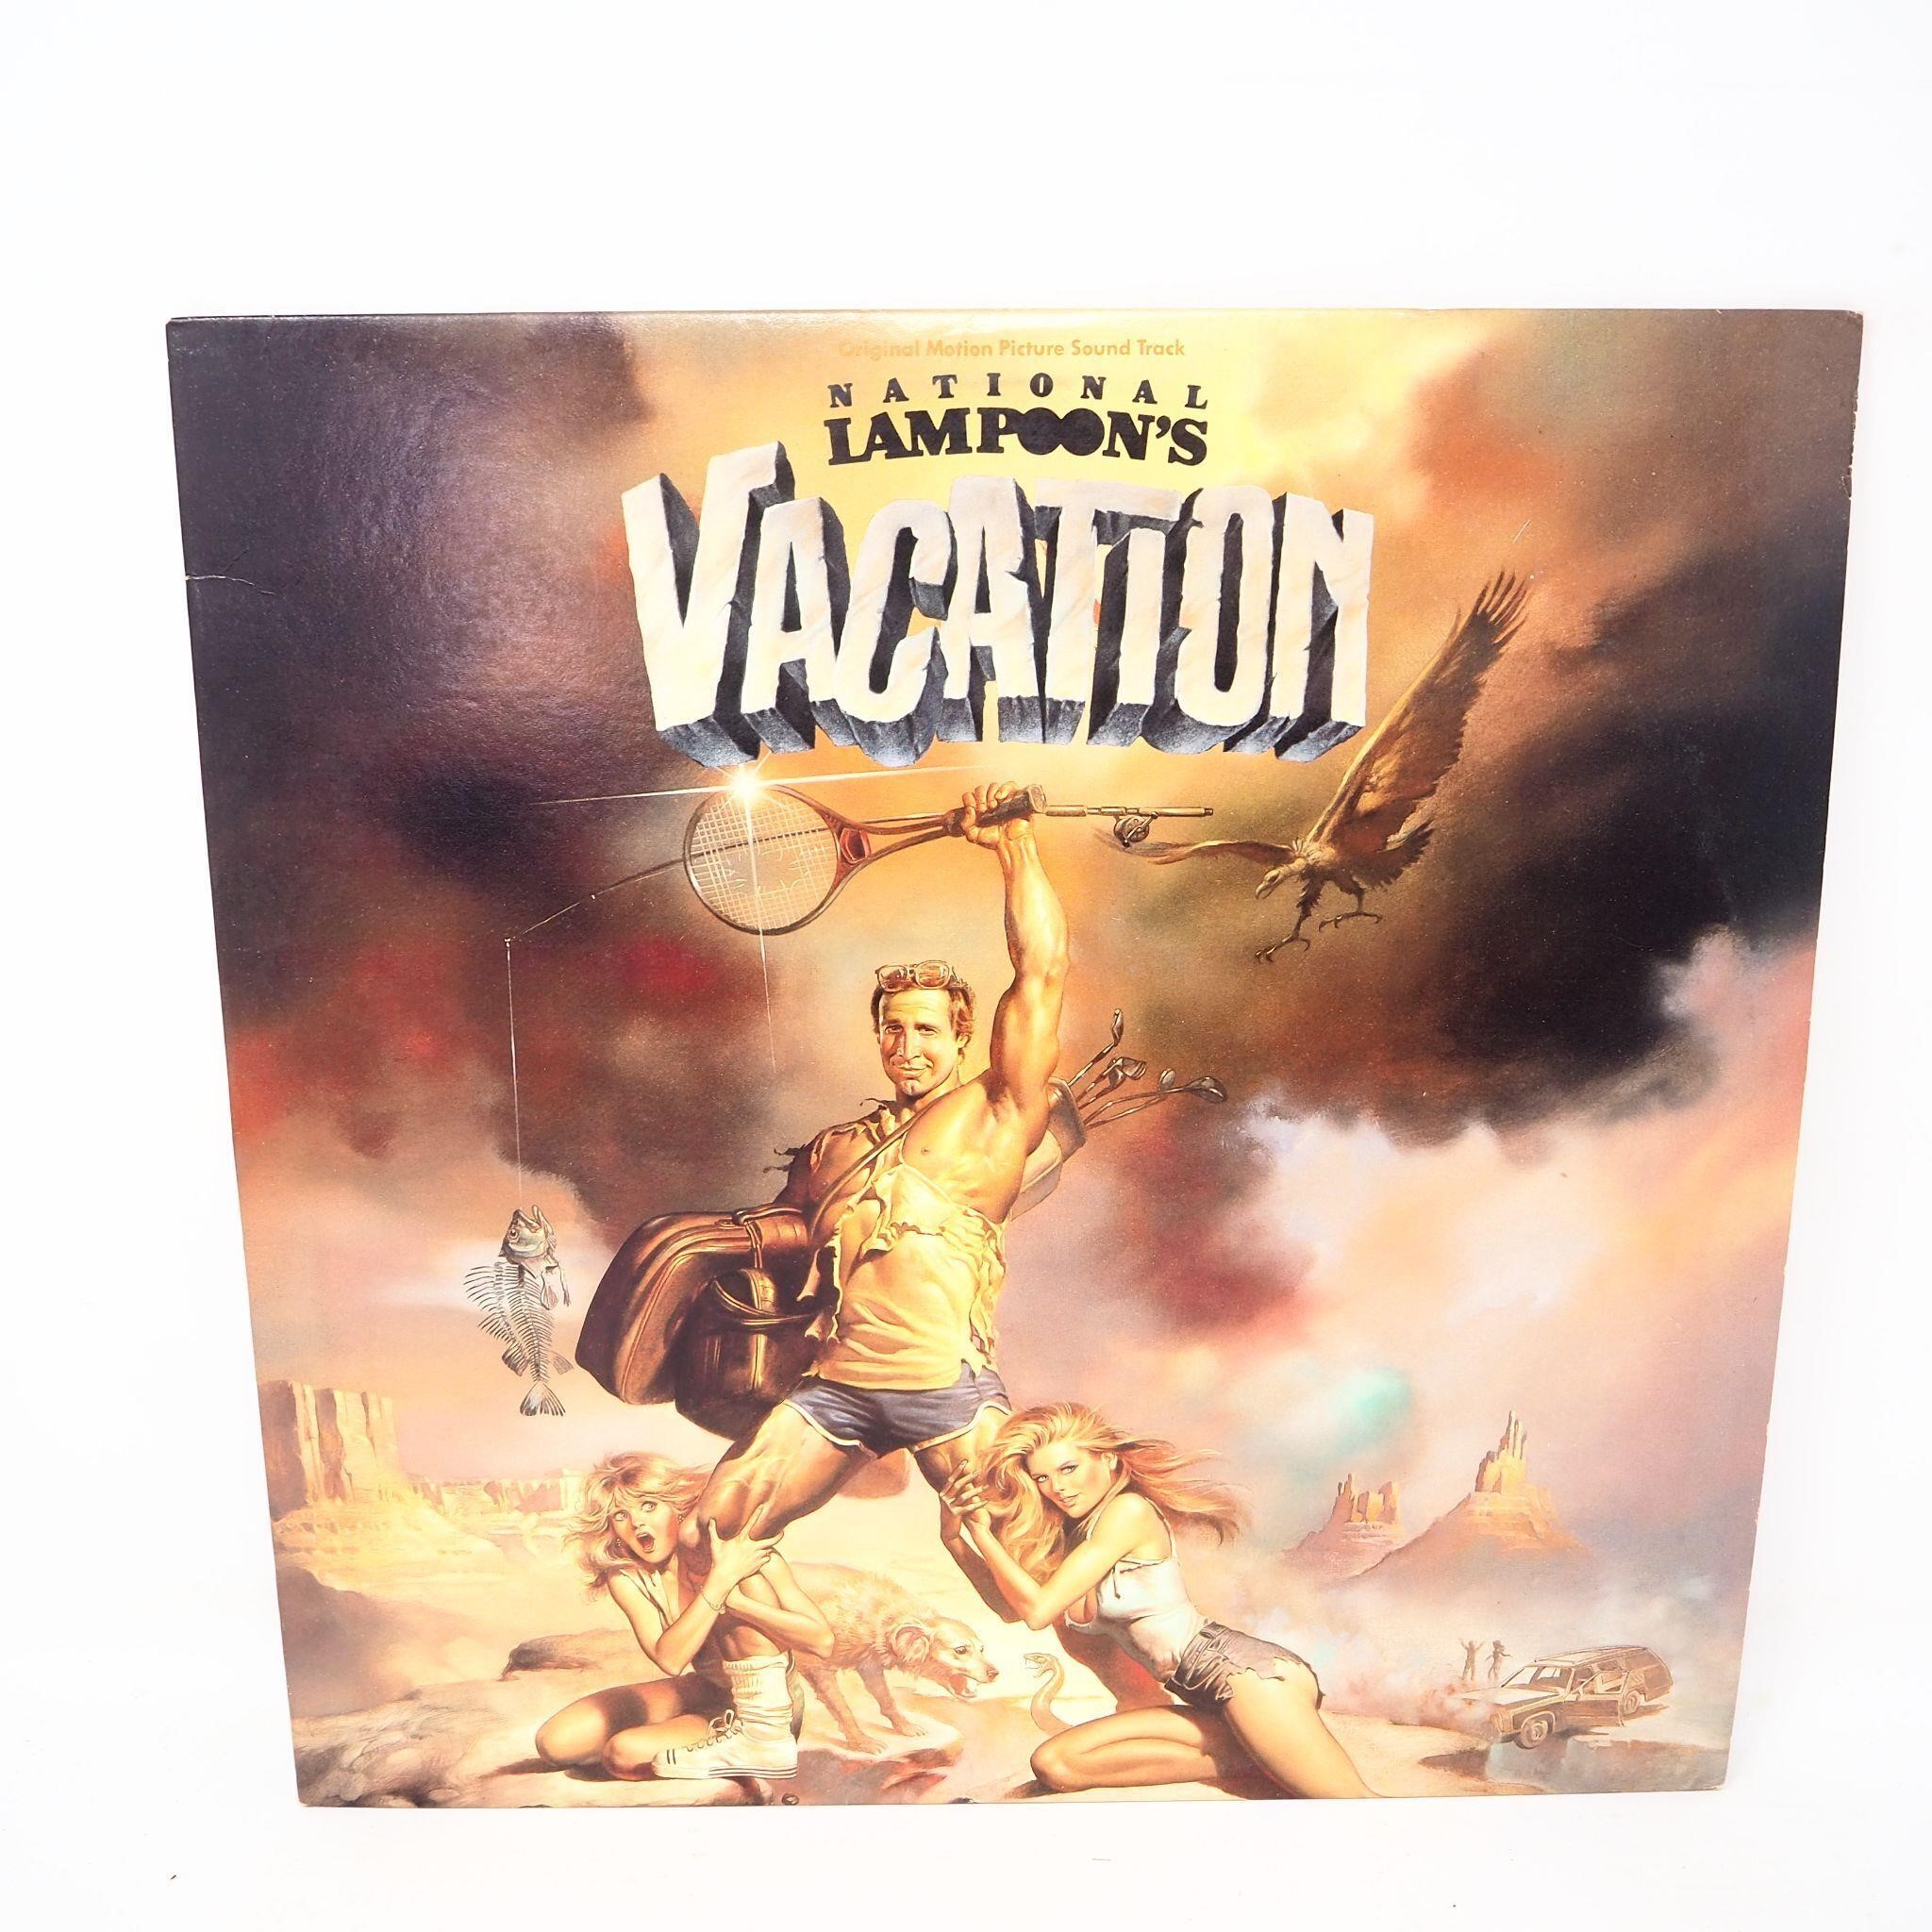 National Lampoons Vacation Soundtrack Lp Vinyl Live And Online Auctions On 